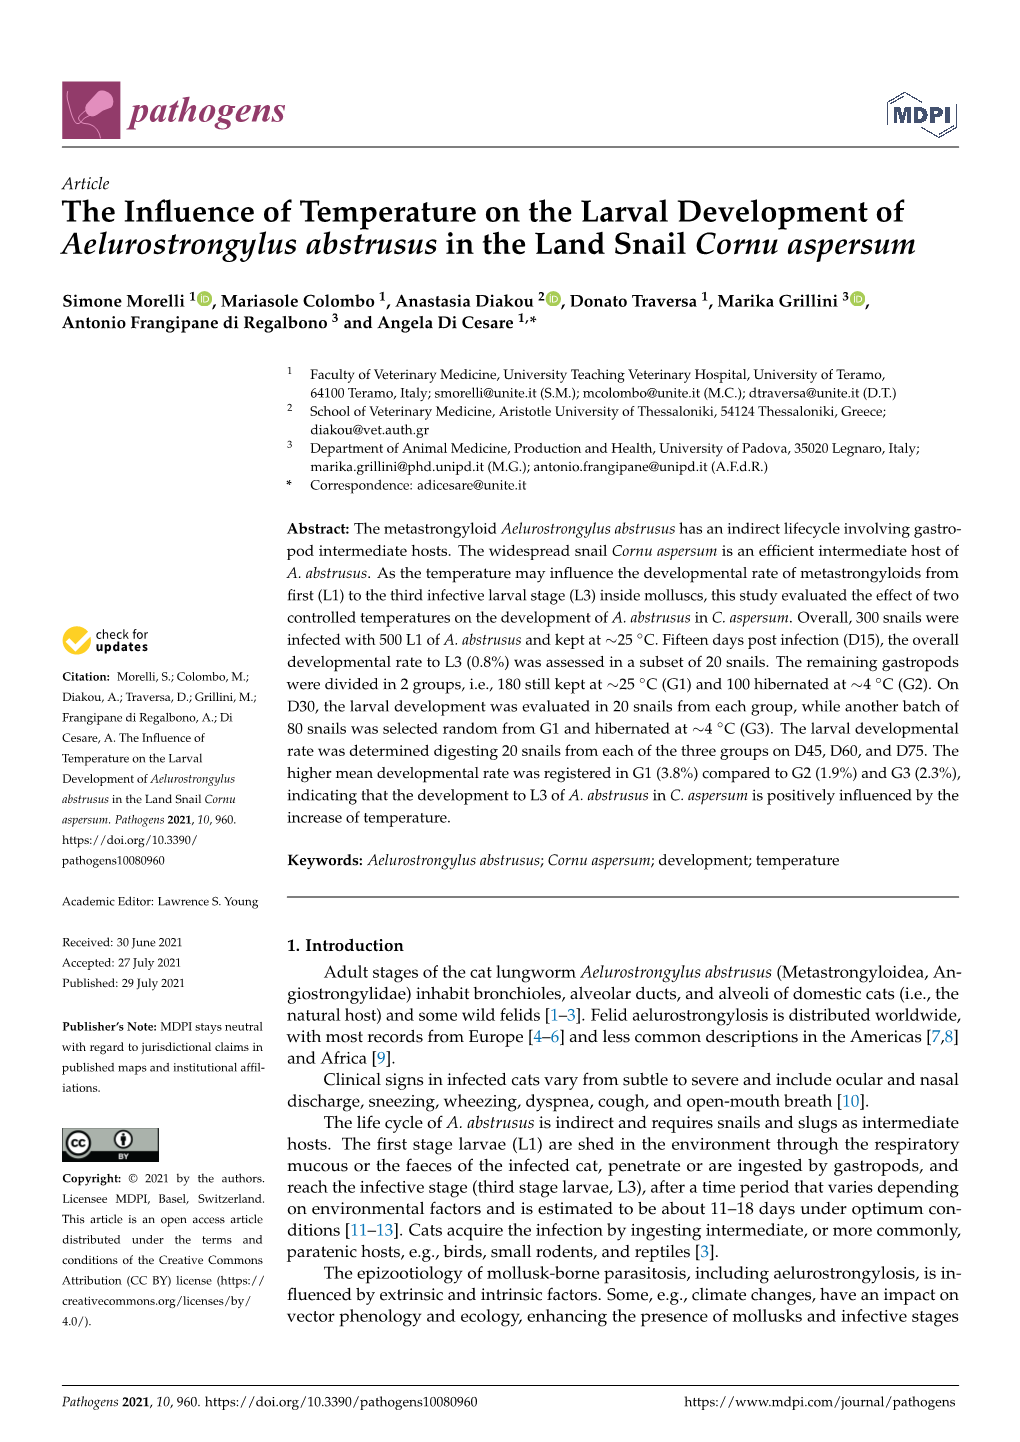 The Influence of Temperature on the Larval Development of Aelurostrongylus Abstrusus in the Land Snail Cornu Aspersum